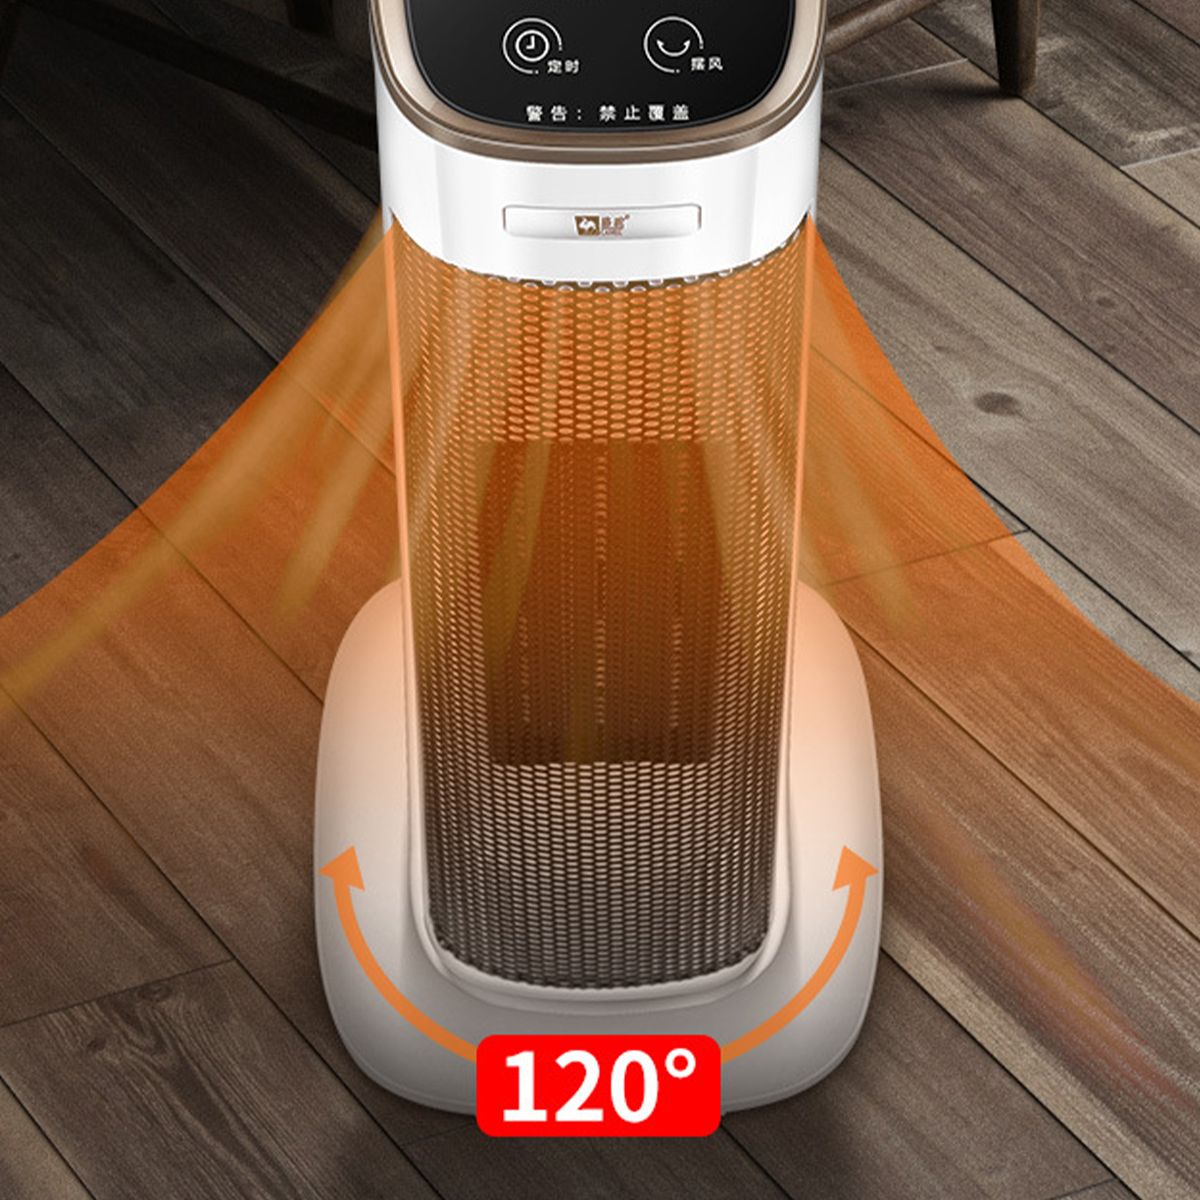 2000W-220V-Portable-Electric-Heater-Remote-Control-Air-Warmer-Fan-Blower-for-Home-Office-1595083